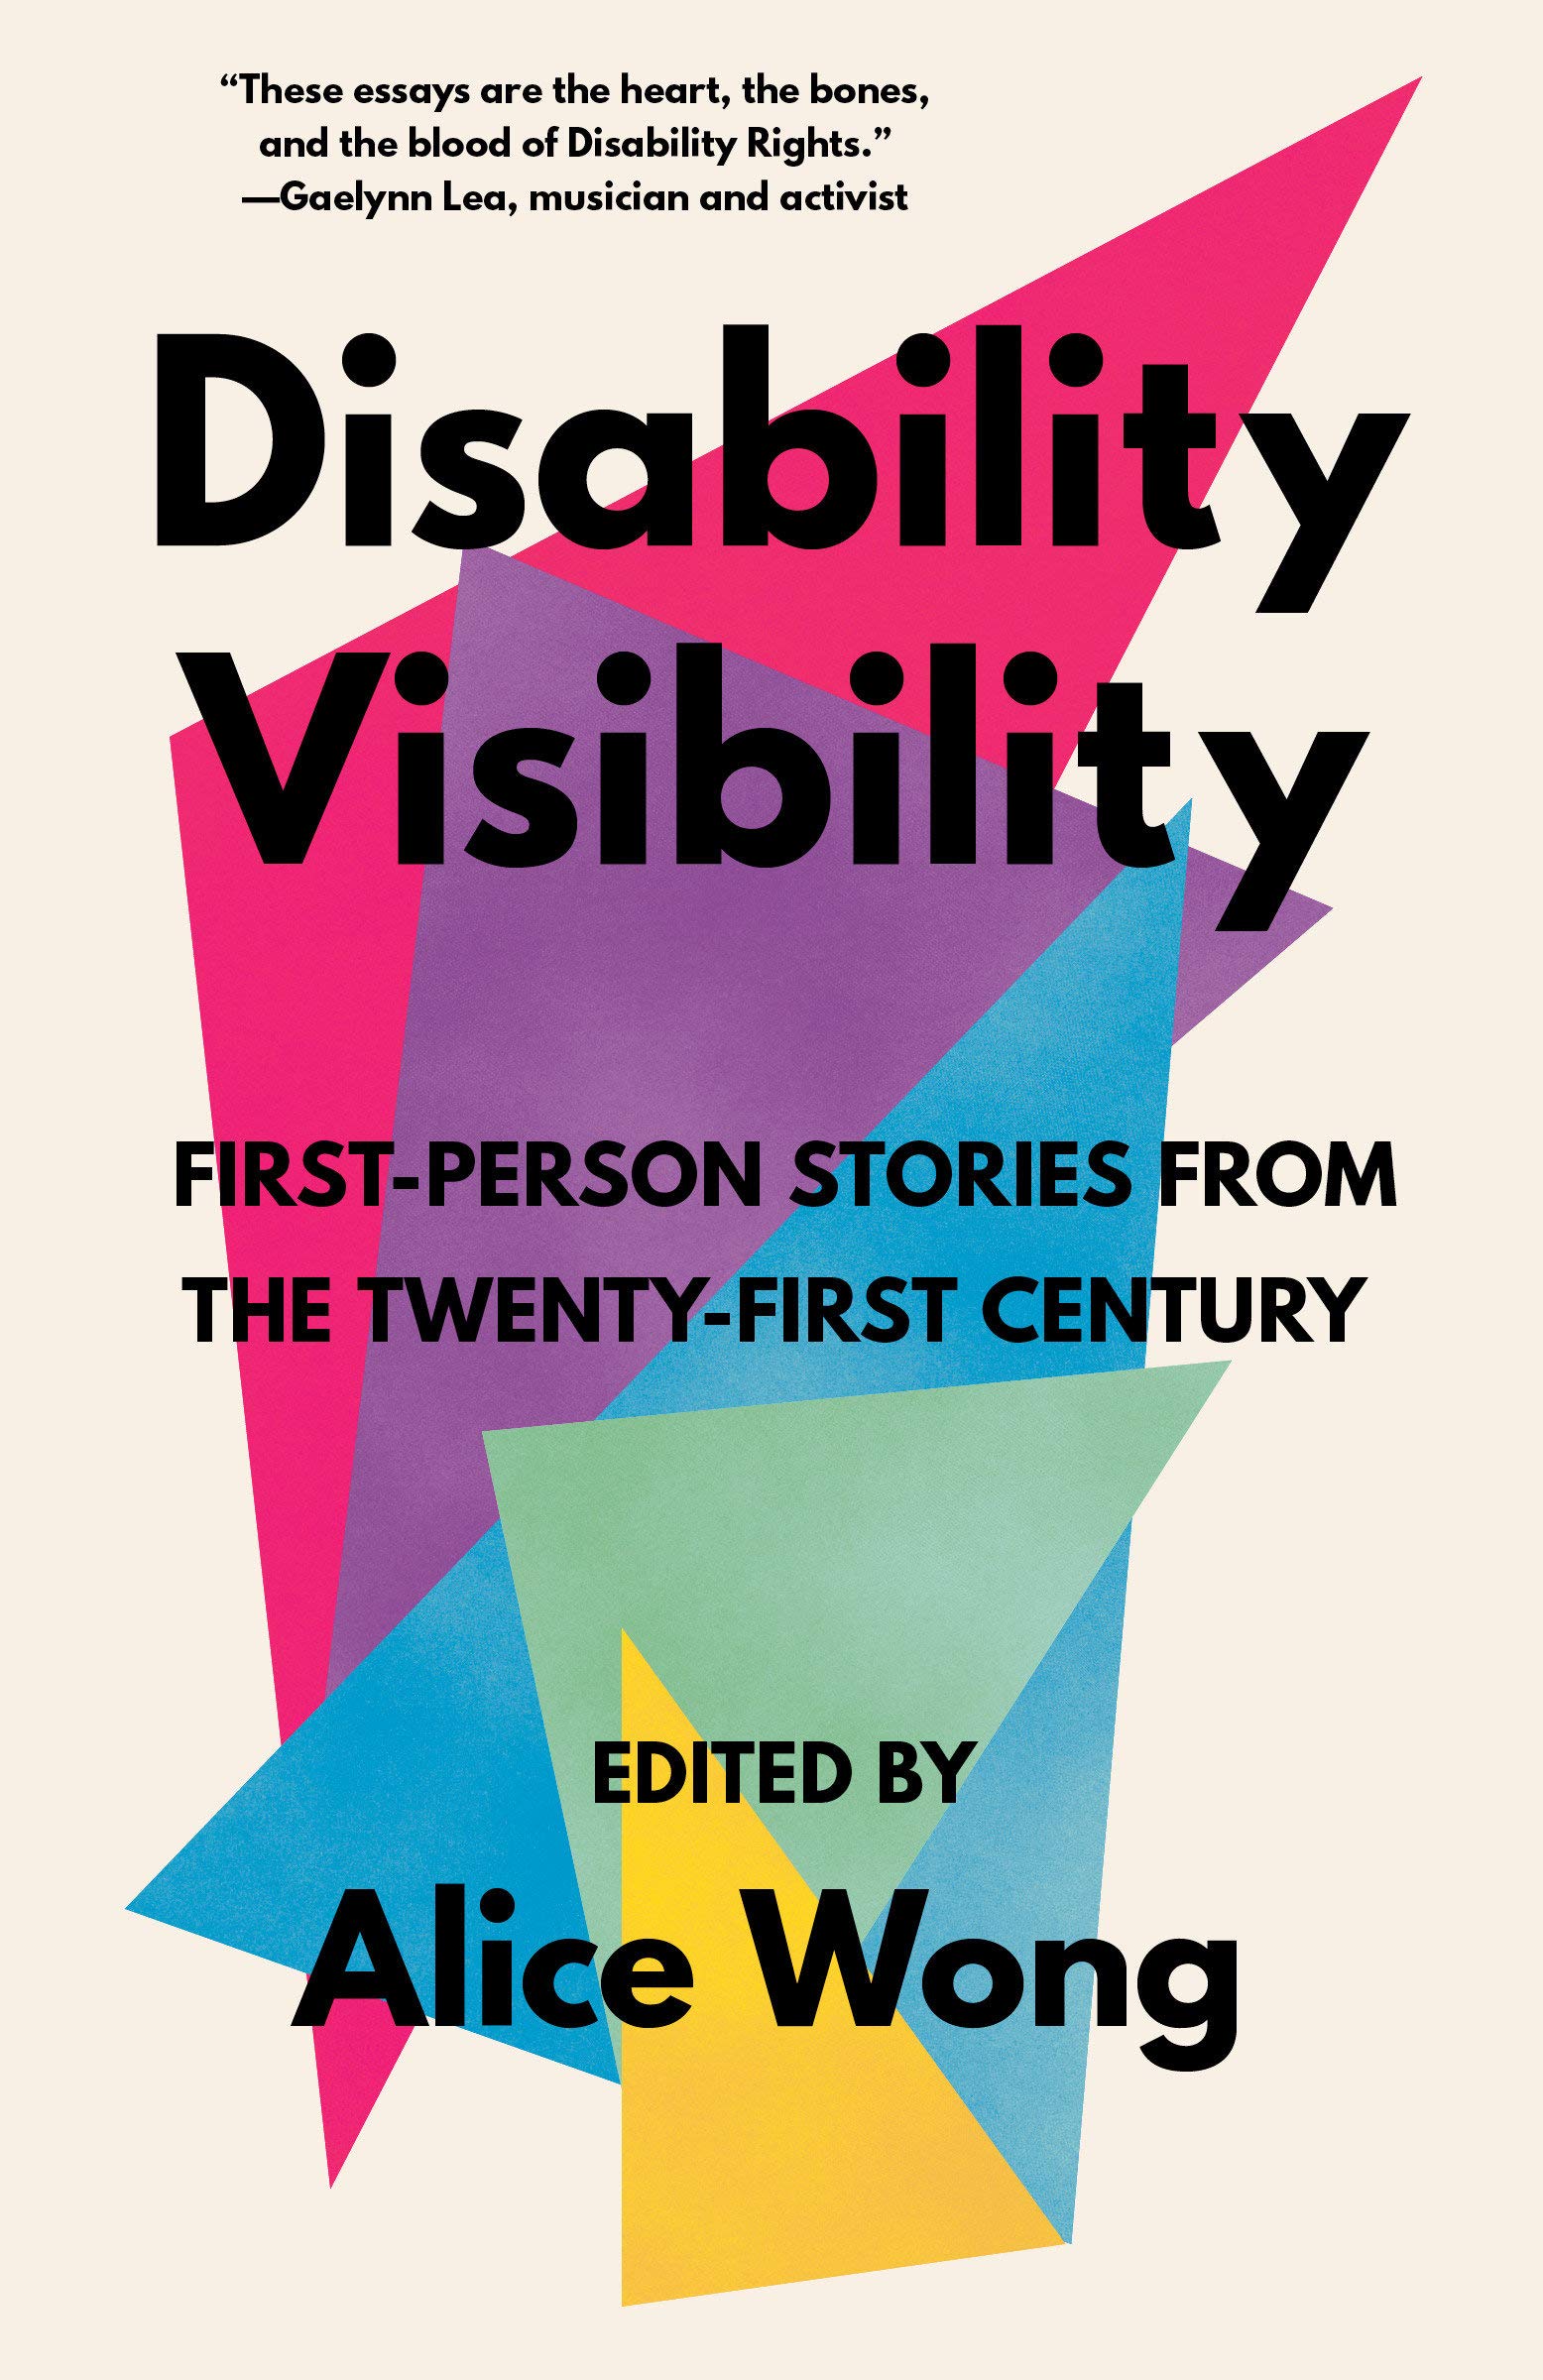 Cover of Disability Visibility: First-Person Stories from the Twenty-First Century by Alice Wong